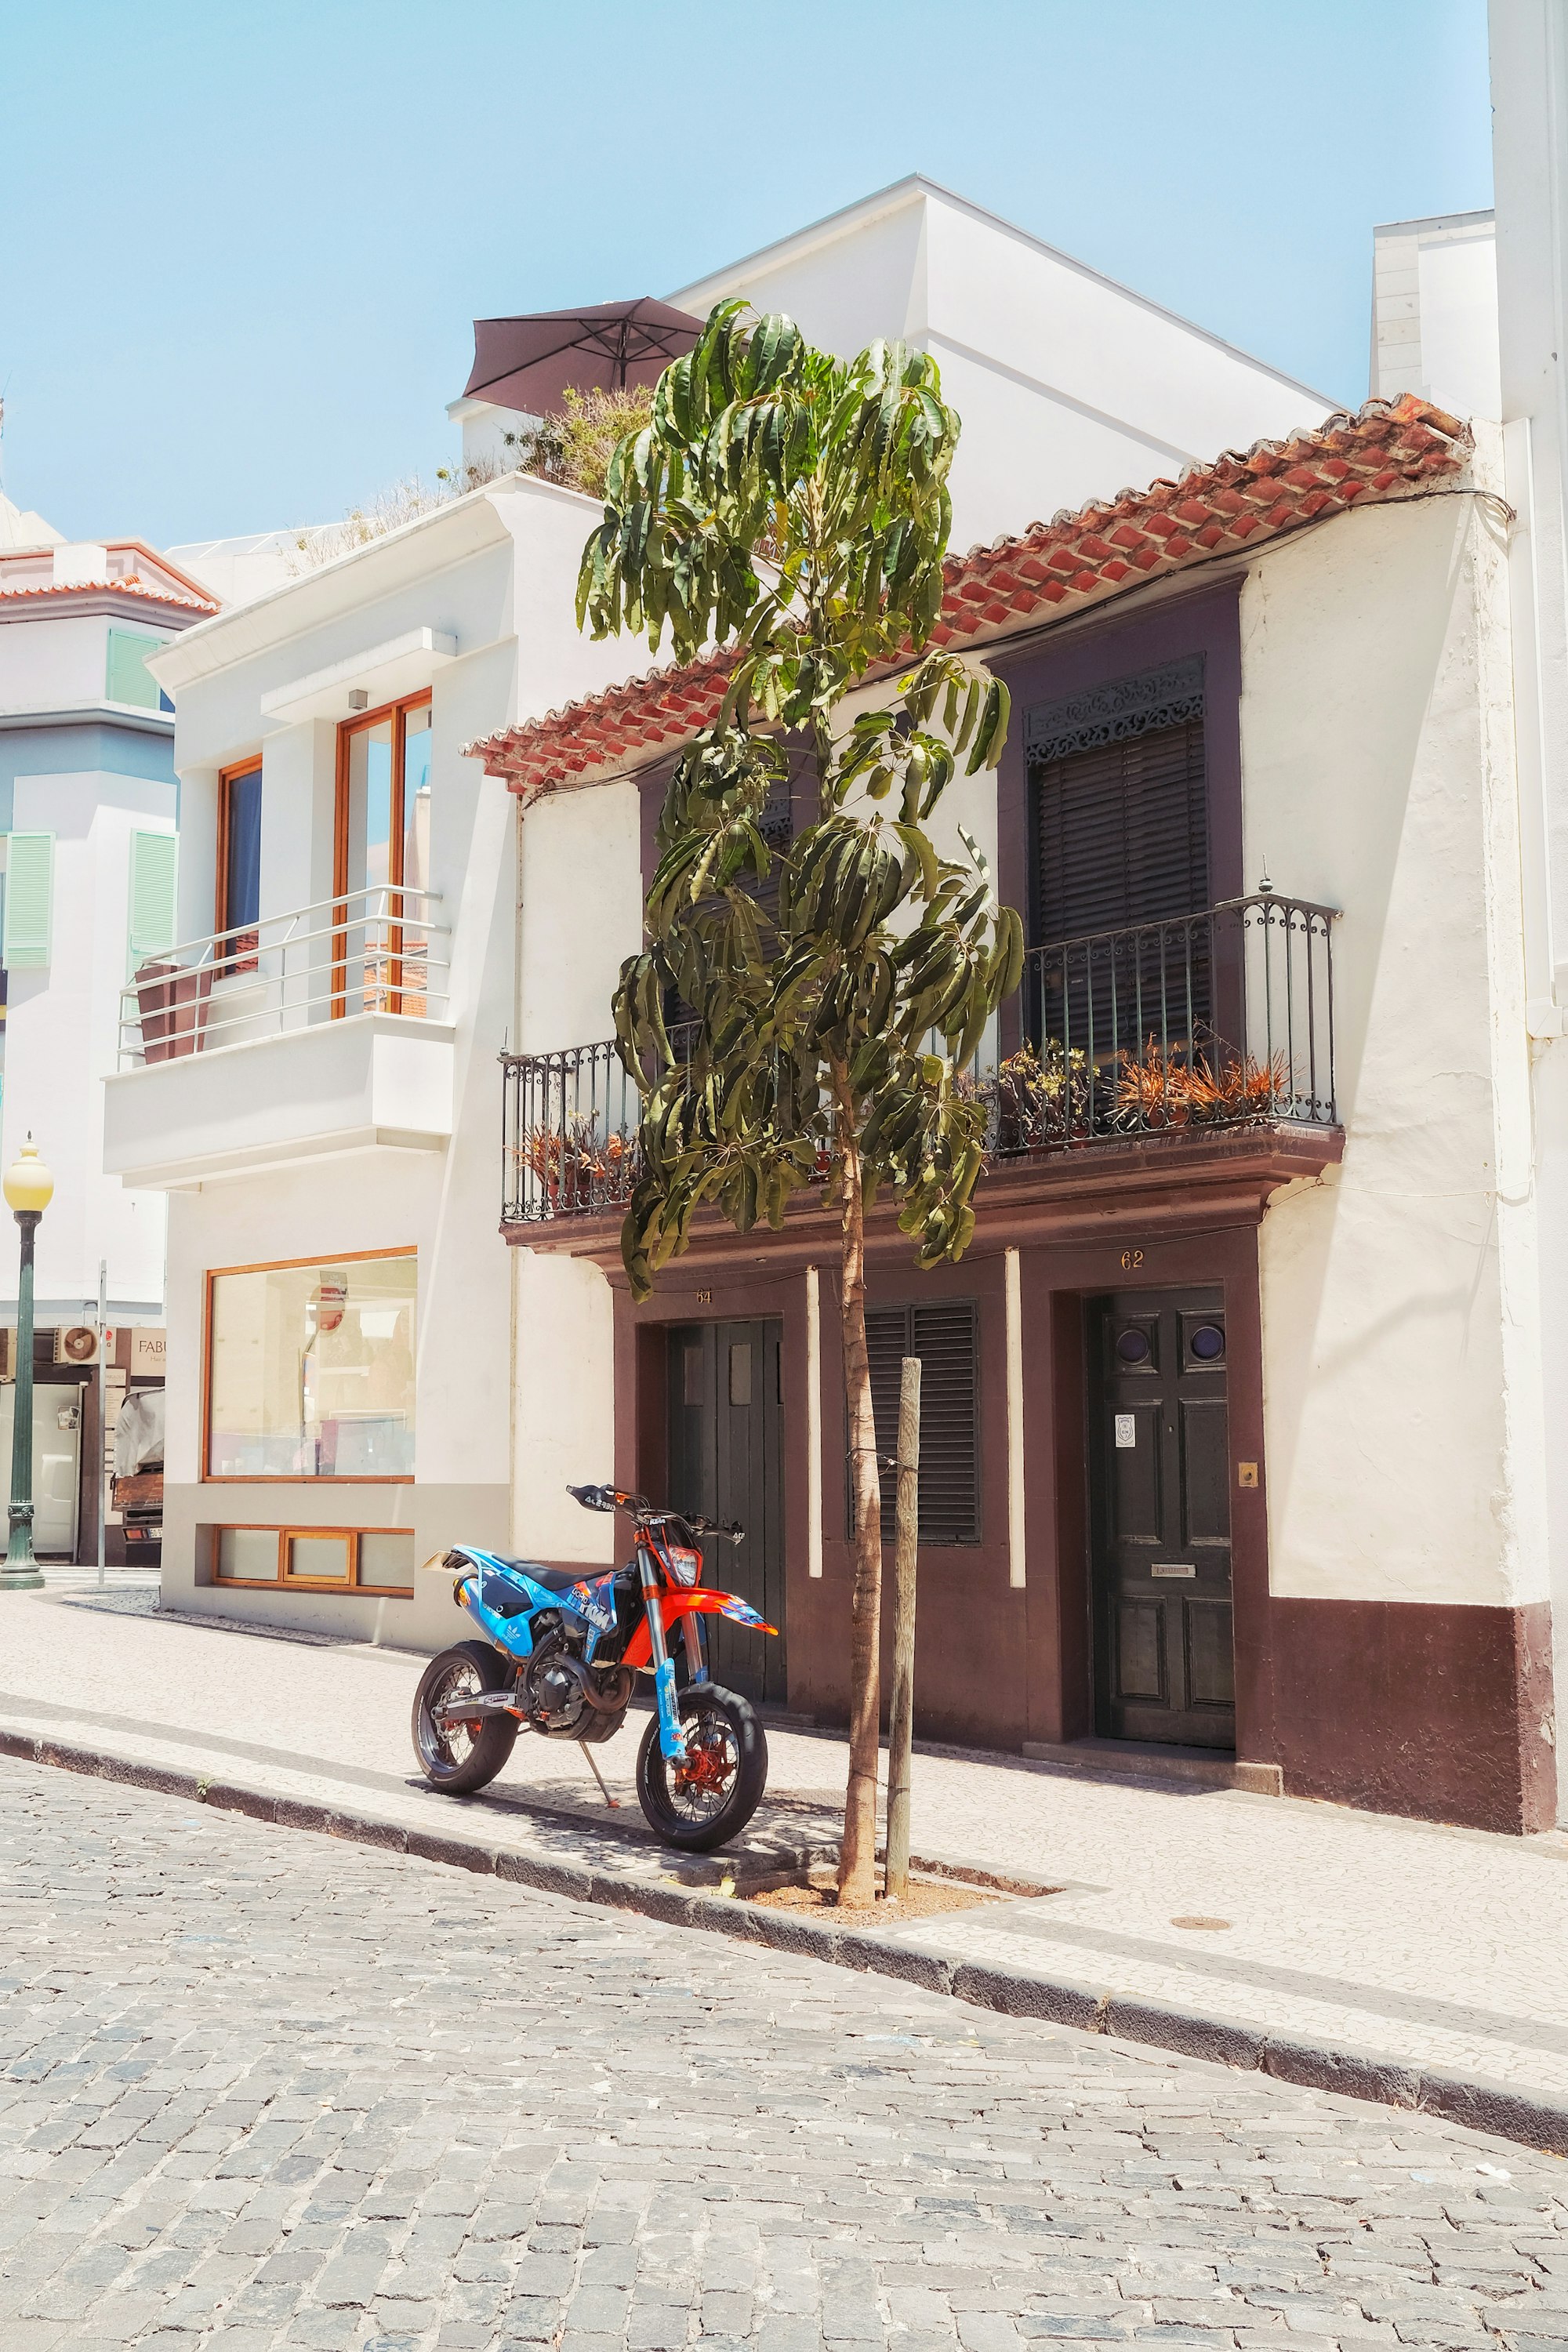 A blue and orange motorcycle is seen beneath a green tree in summer on a side street in Funchal, Madeira